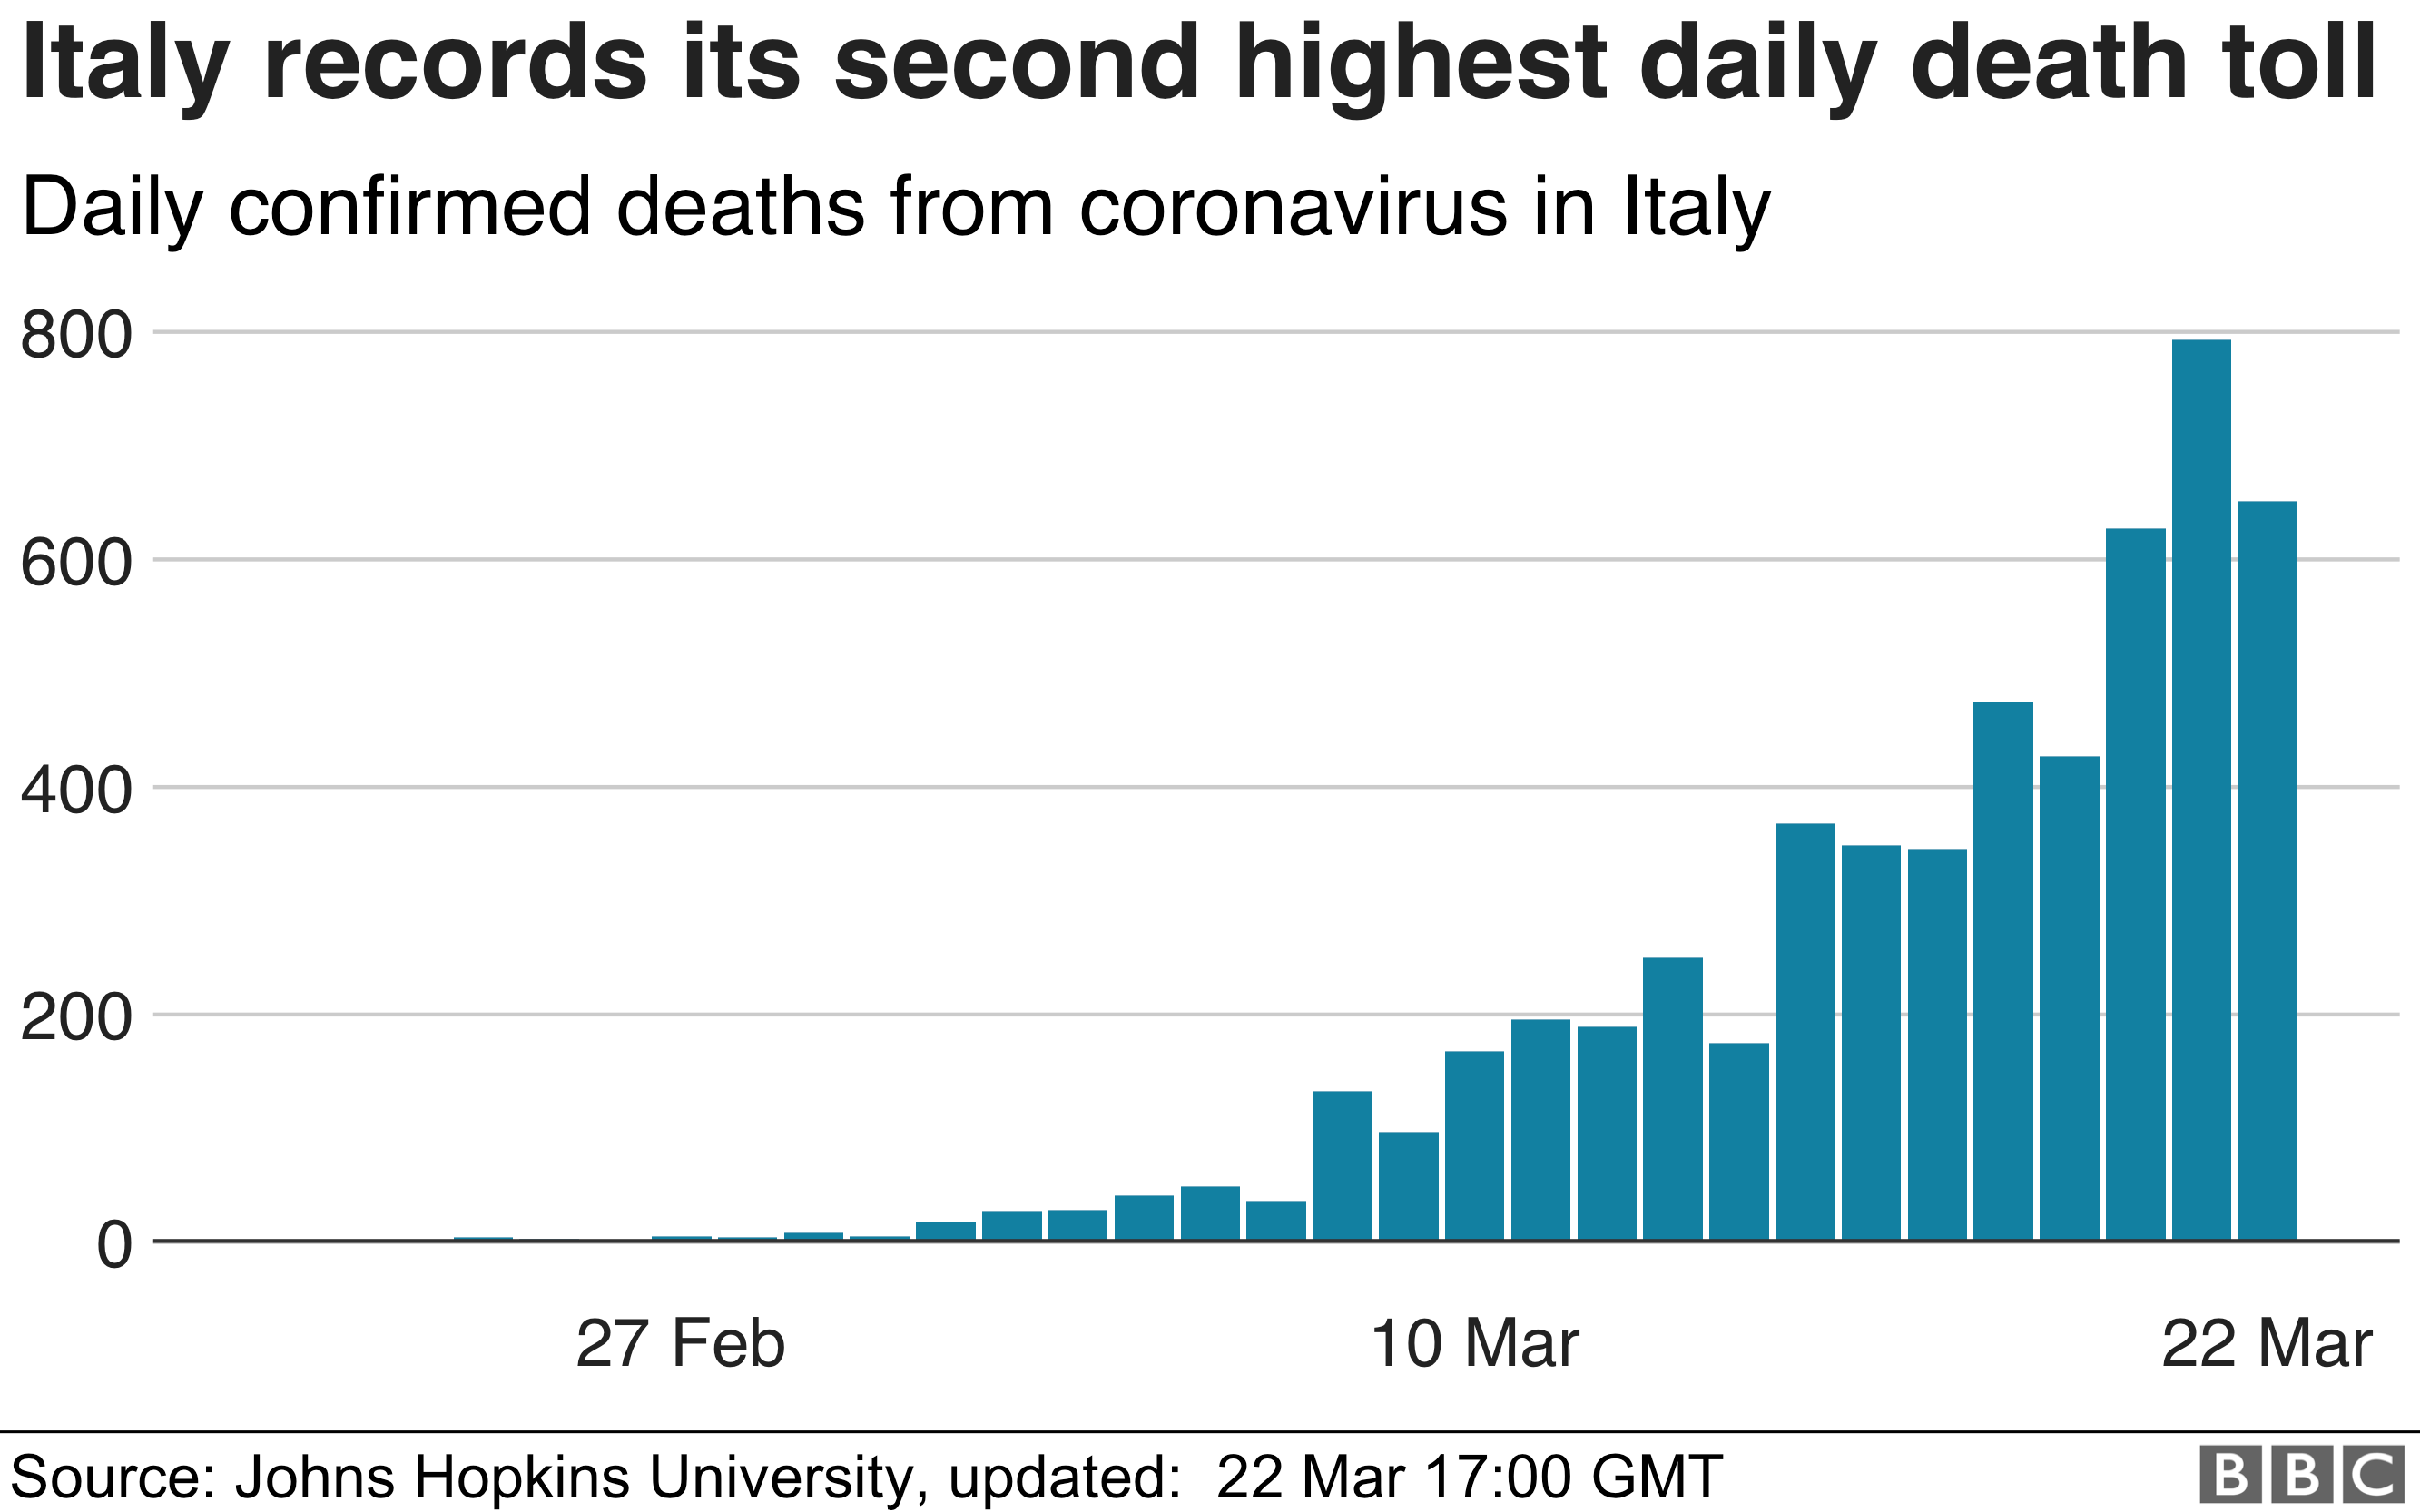 Bar chart showing second highest daily death toll in Italy